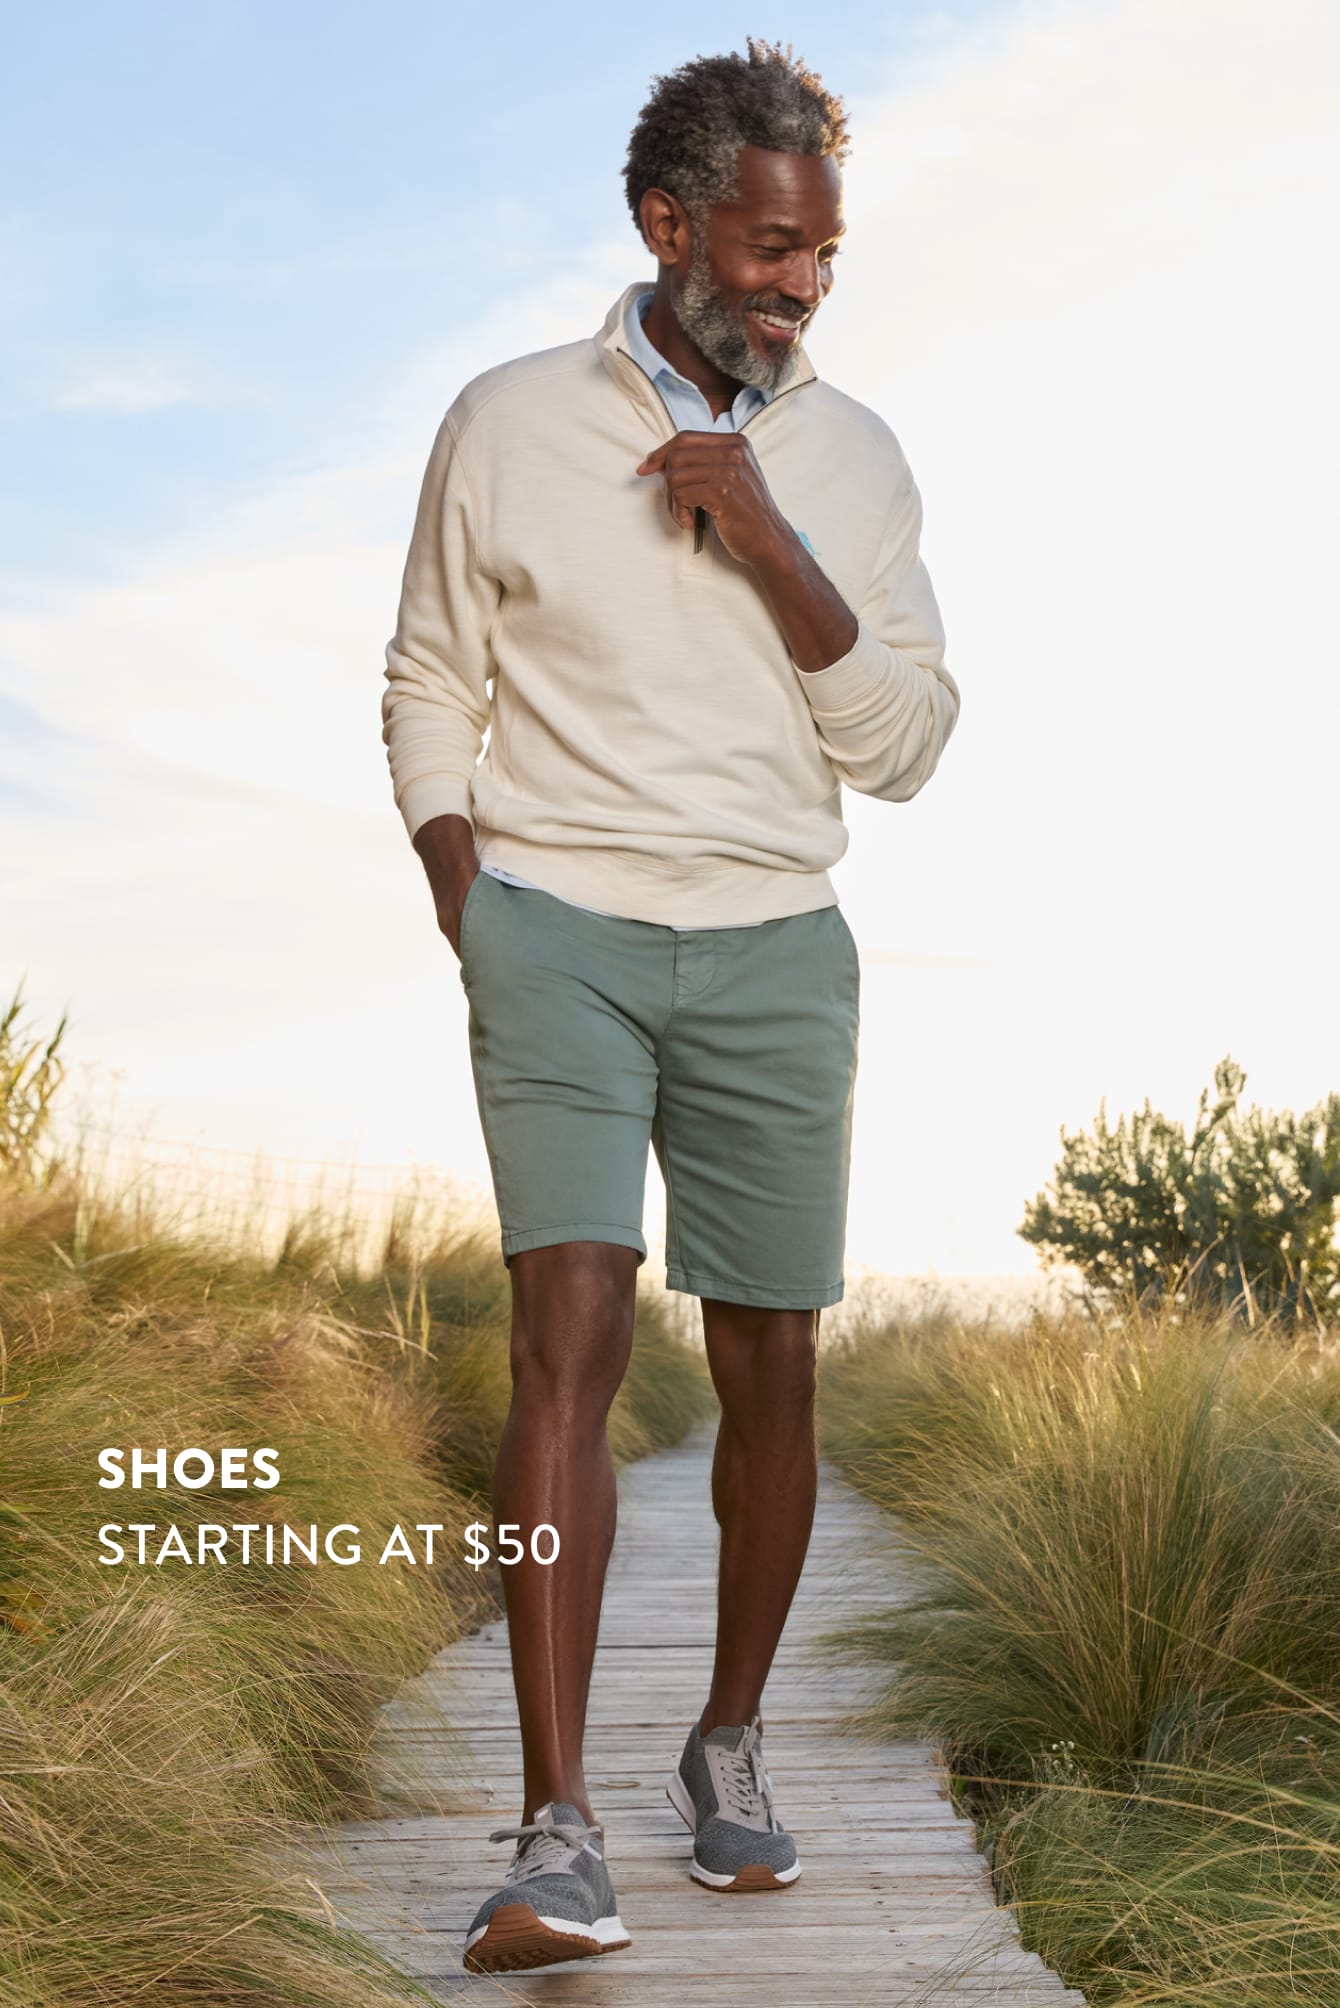 Shoes starting at $50, man wearing Stitch Fix men’s cream quarter-zip sweater, green shorts and sneakers